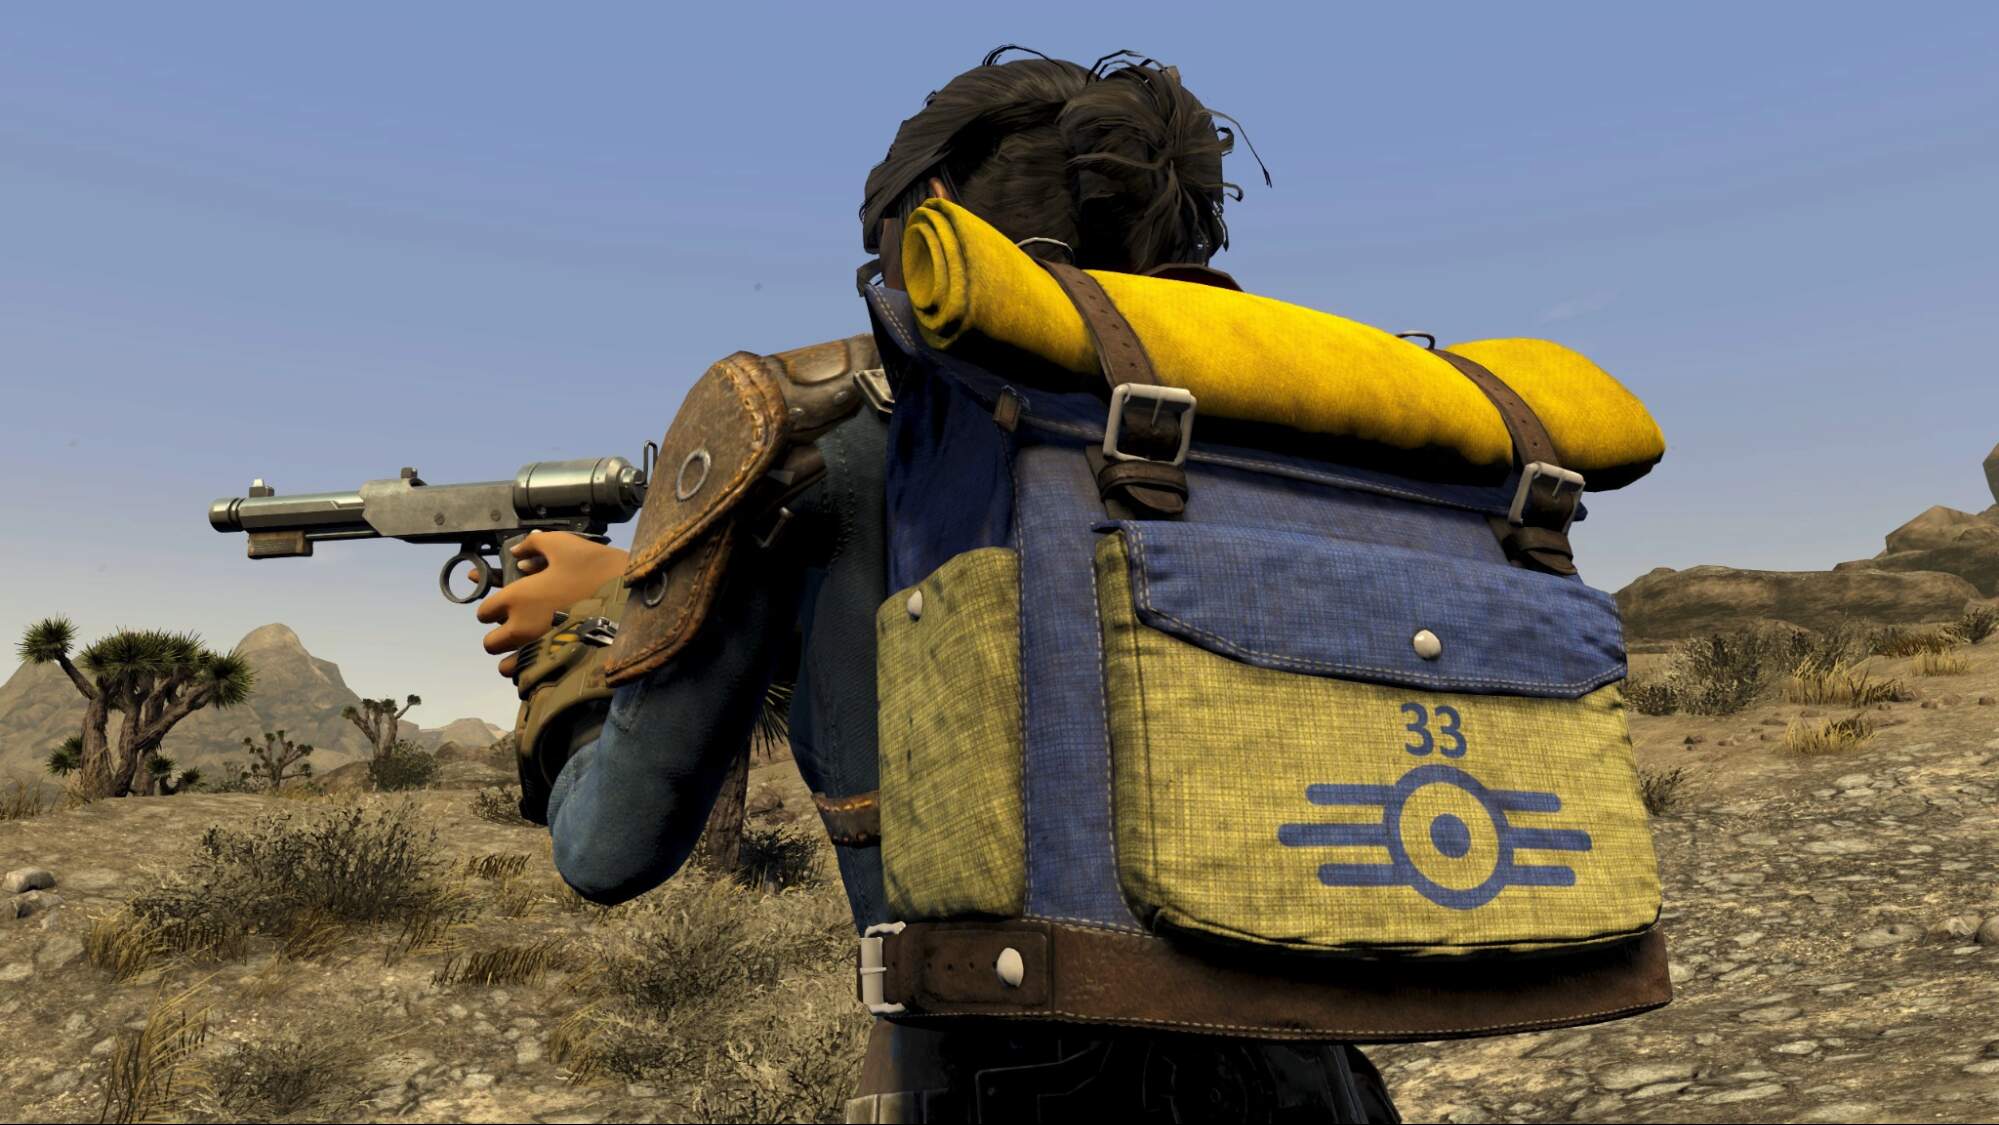 Best mods for Fallout 4 from Fallout - Lucy's Backpack Vault 33 Retex from Fallout